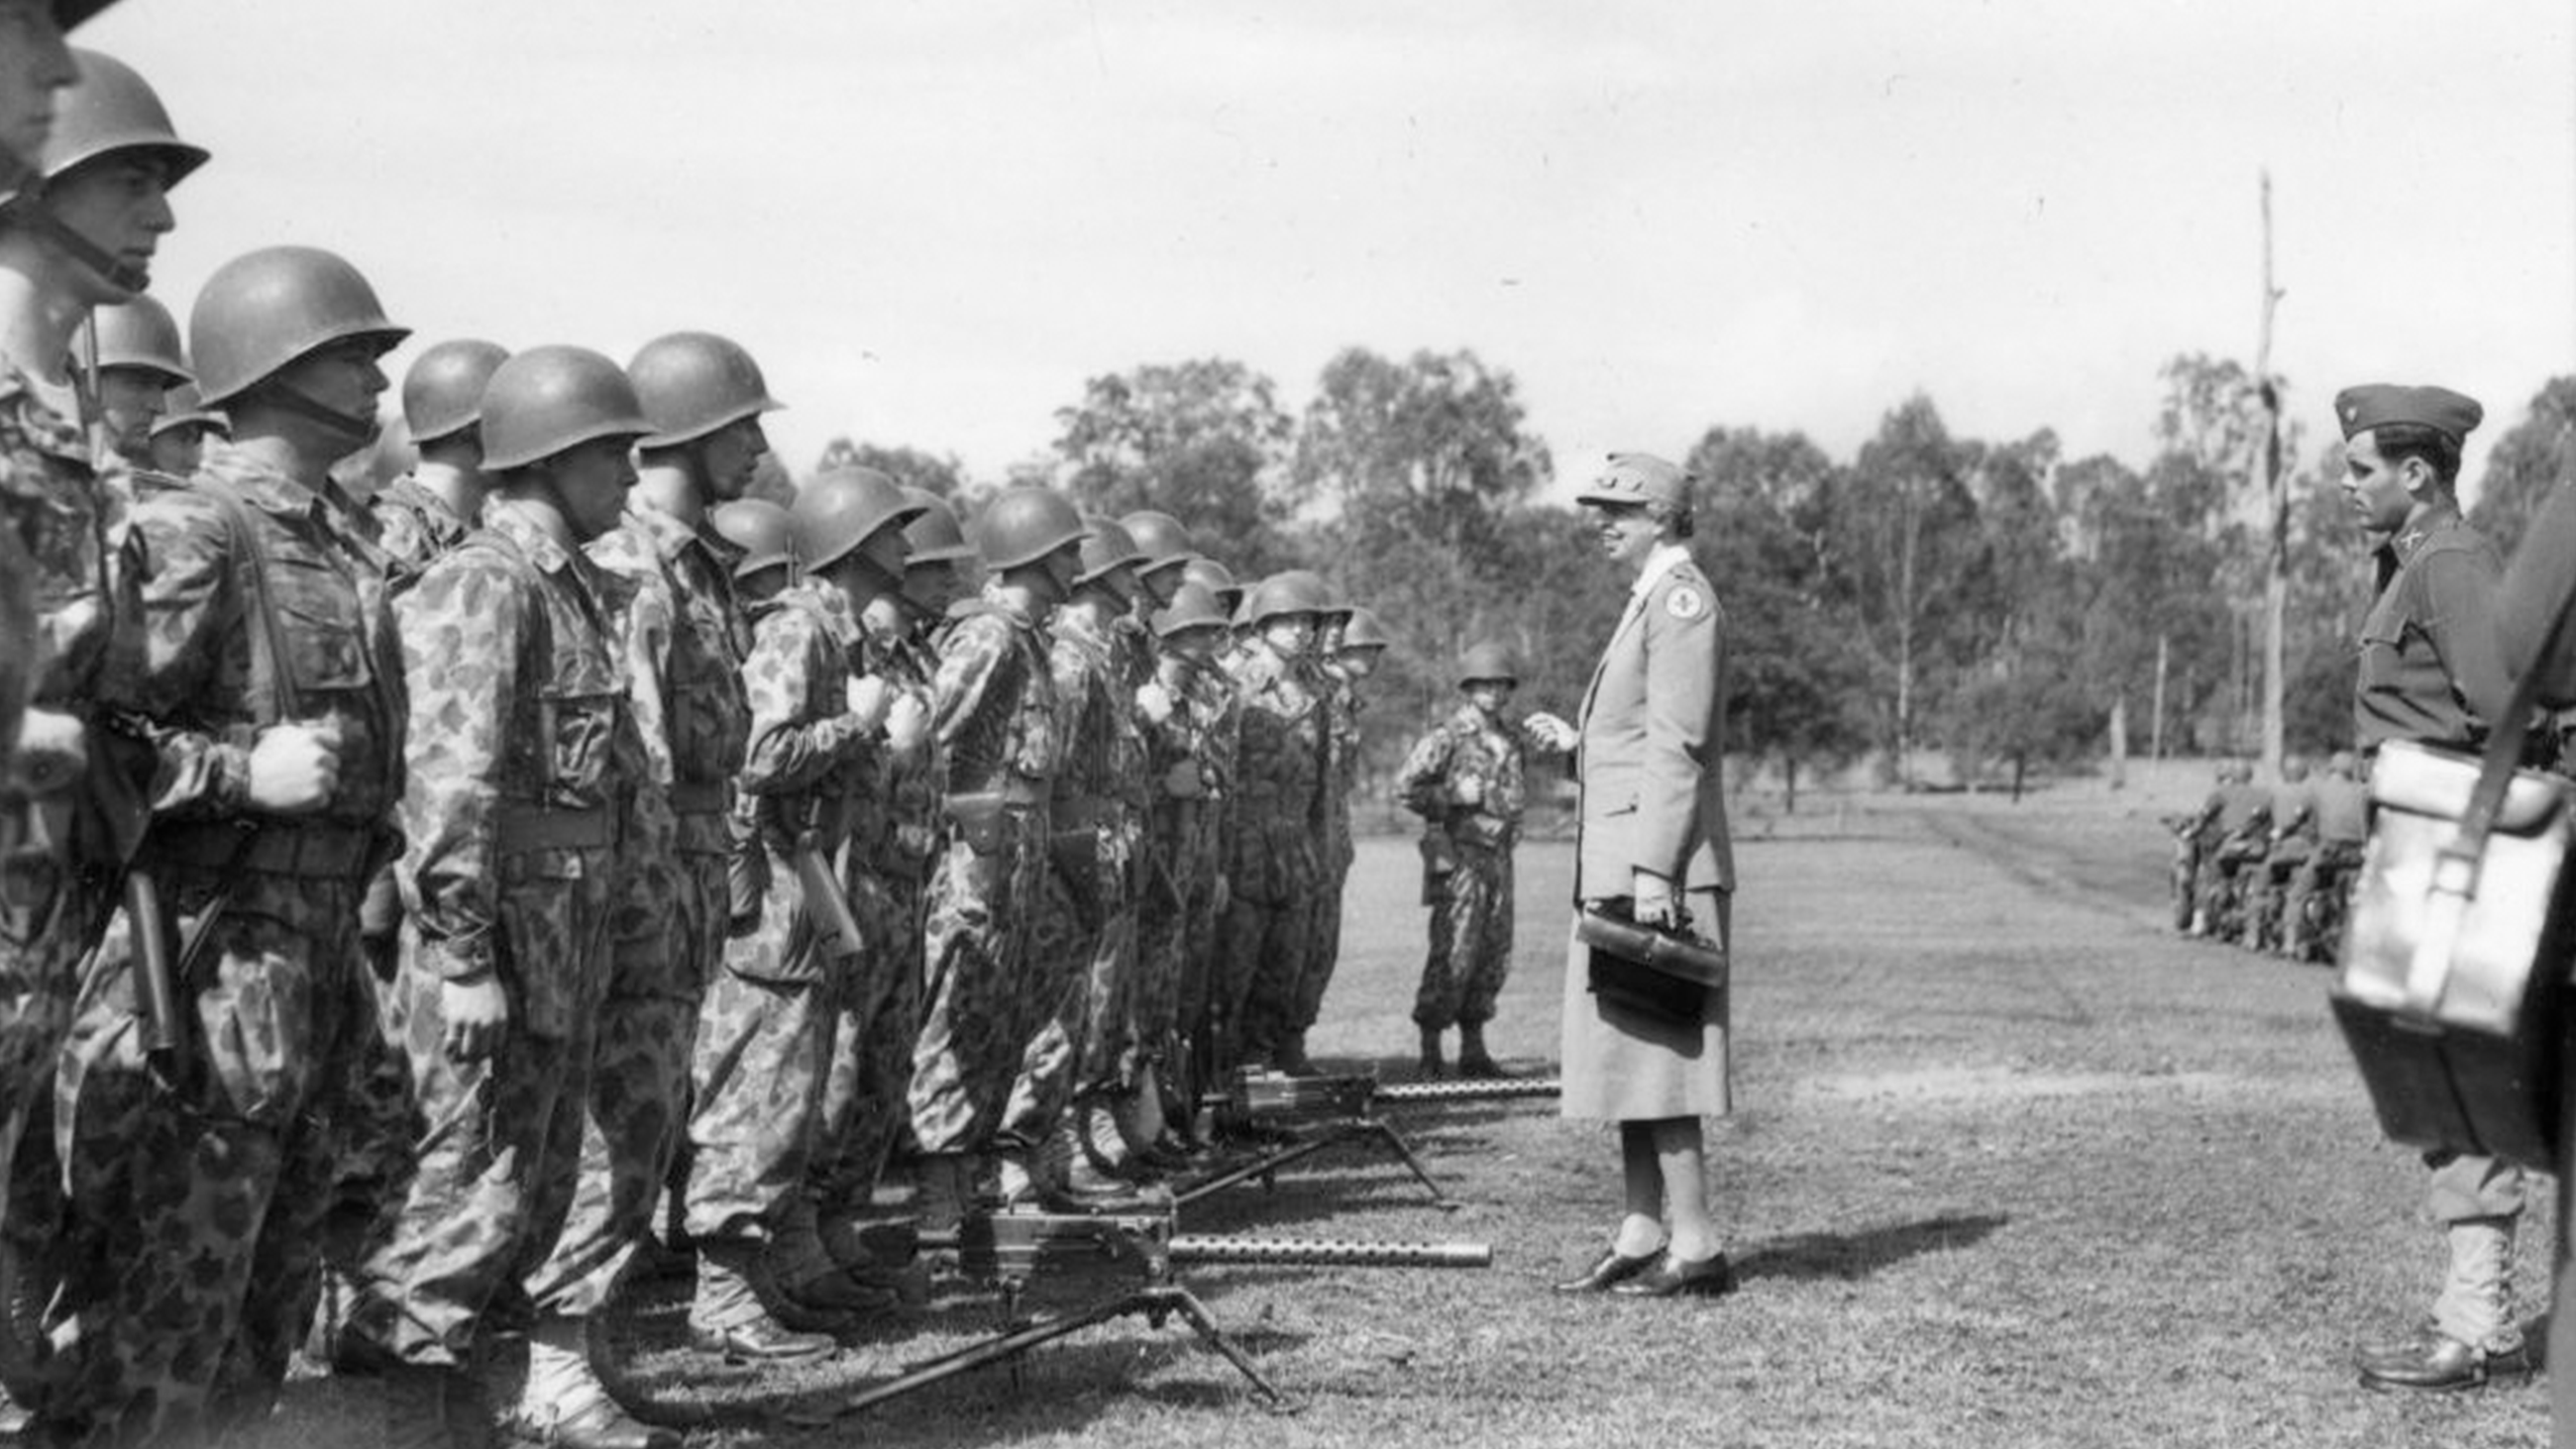 Eleanor Roosevelt stands in front of a line-up of soldiers in an open, outdoor clearing lined with trees. Eleanor is wearing her Red Cross uniform and smiling as she addresses the soldiers.